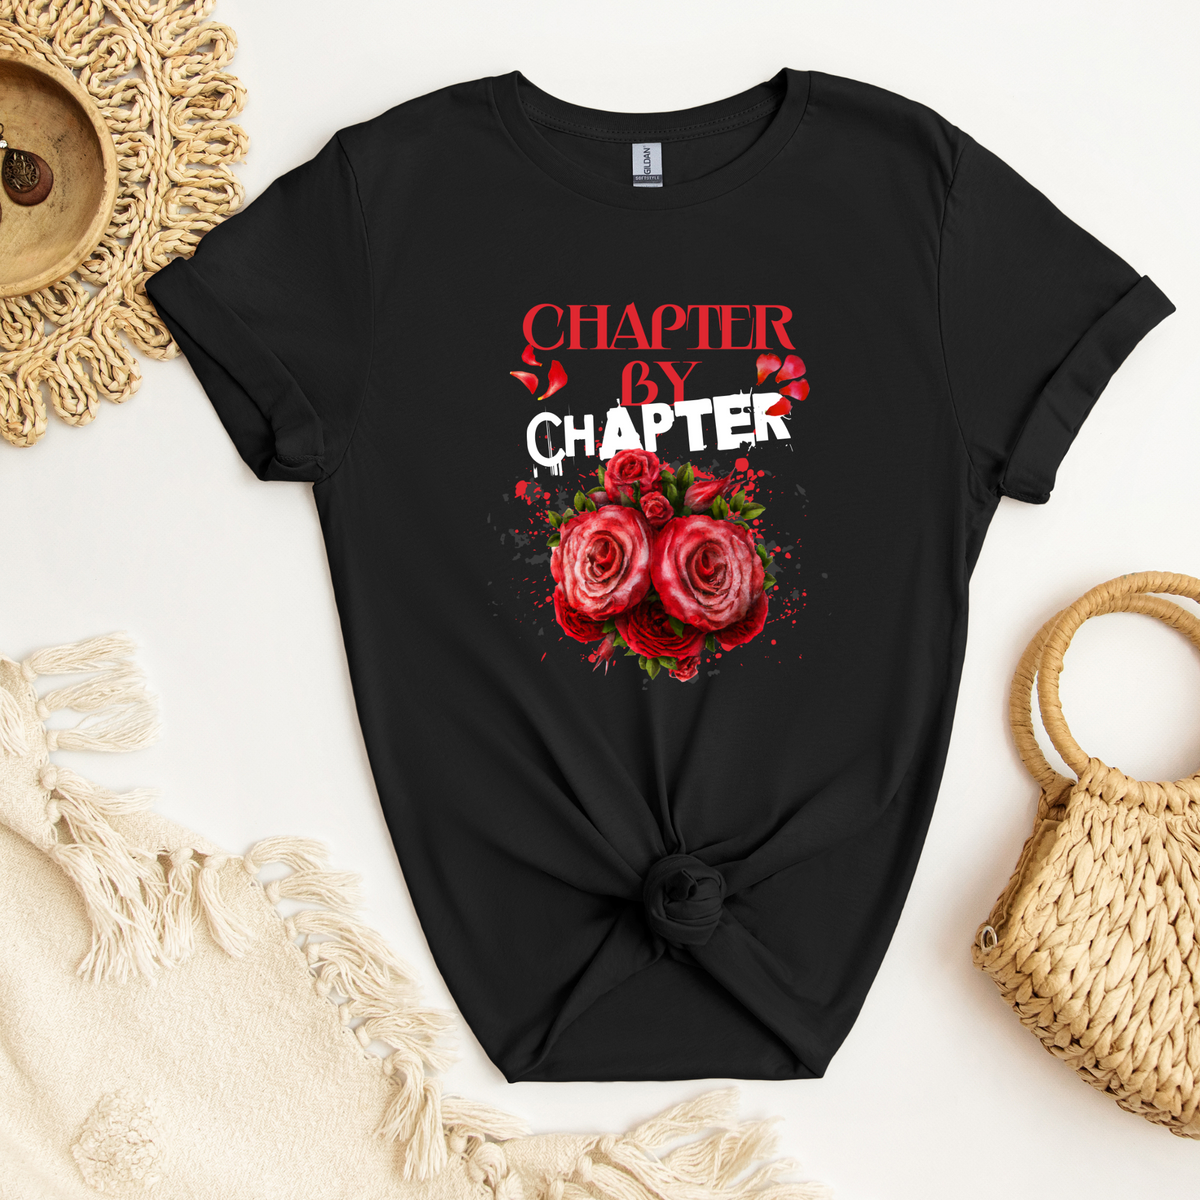 Chapter by Chapter T-Shirt